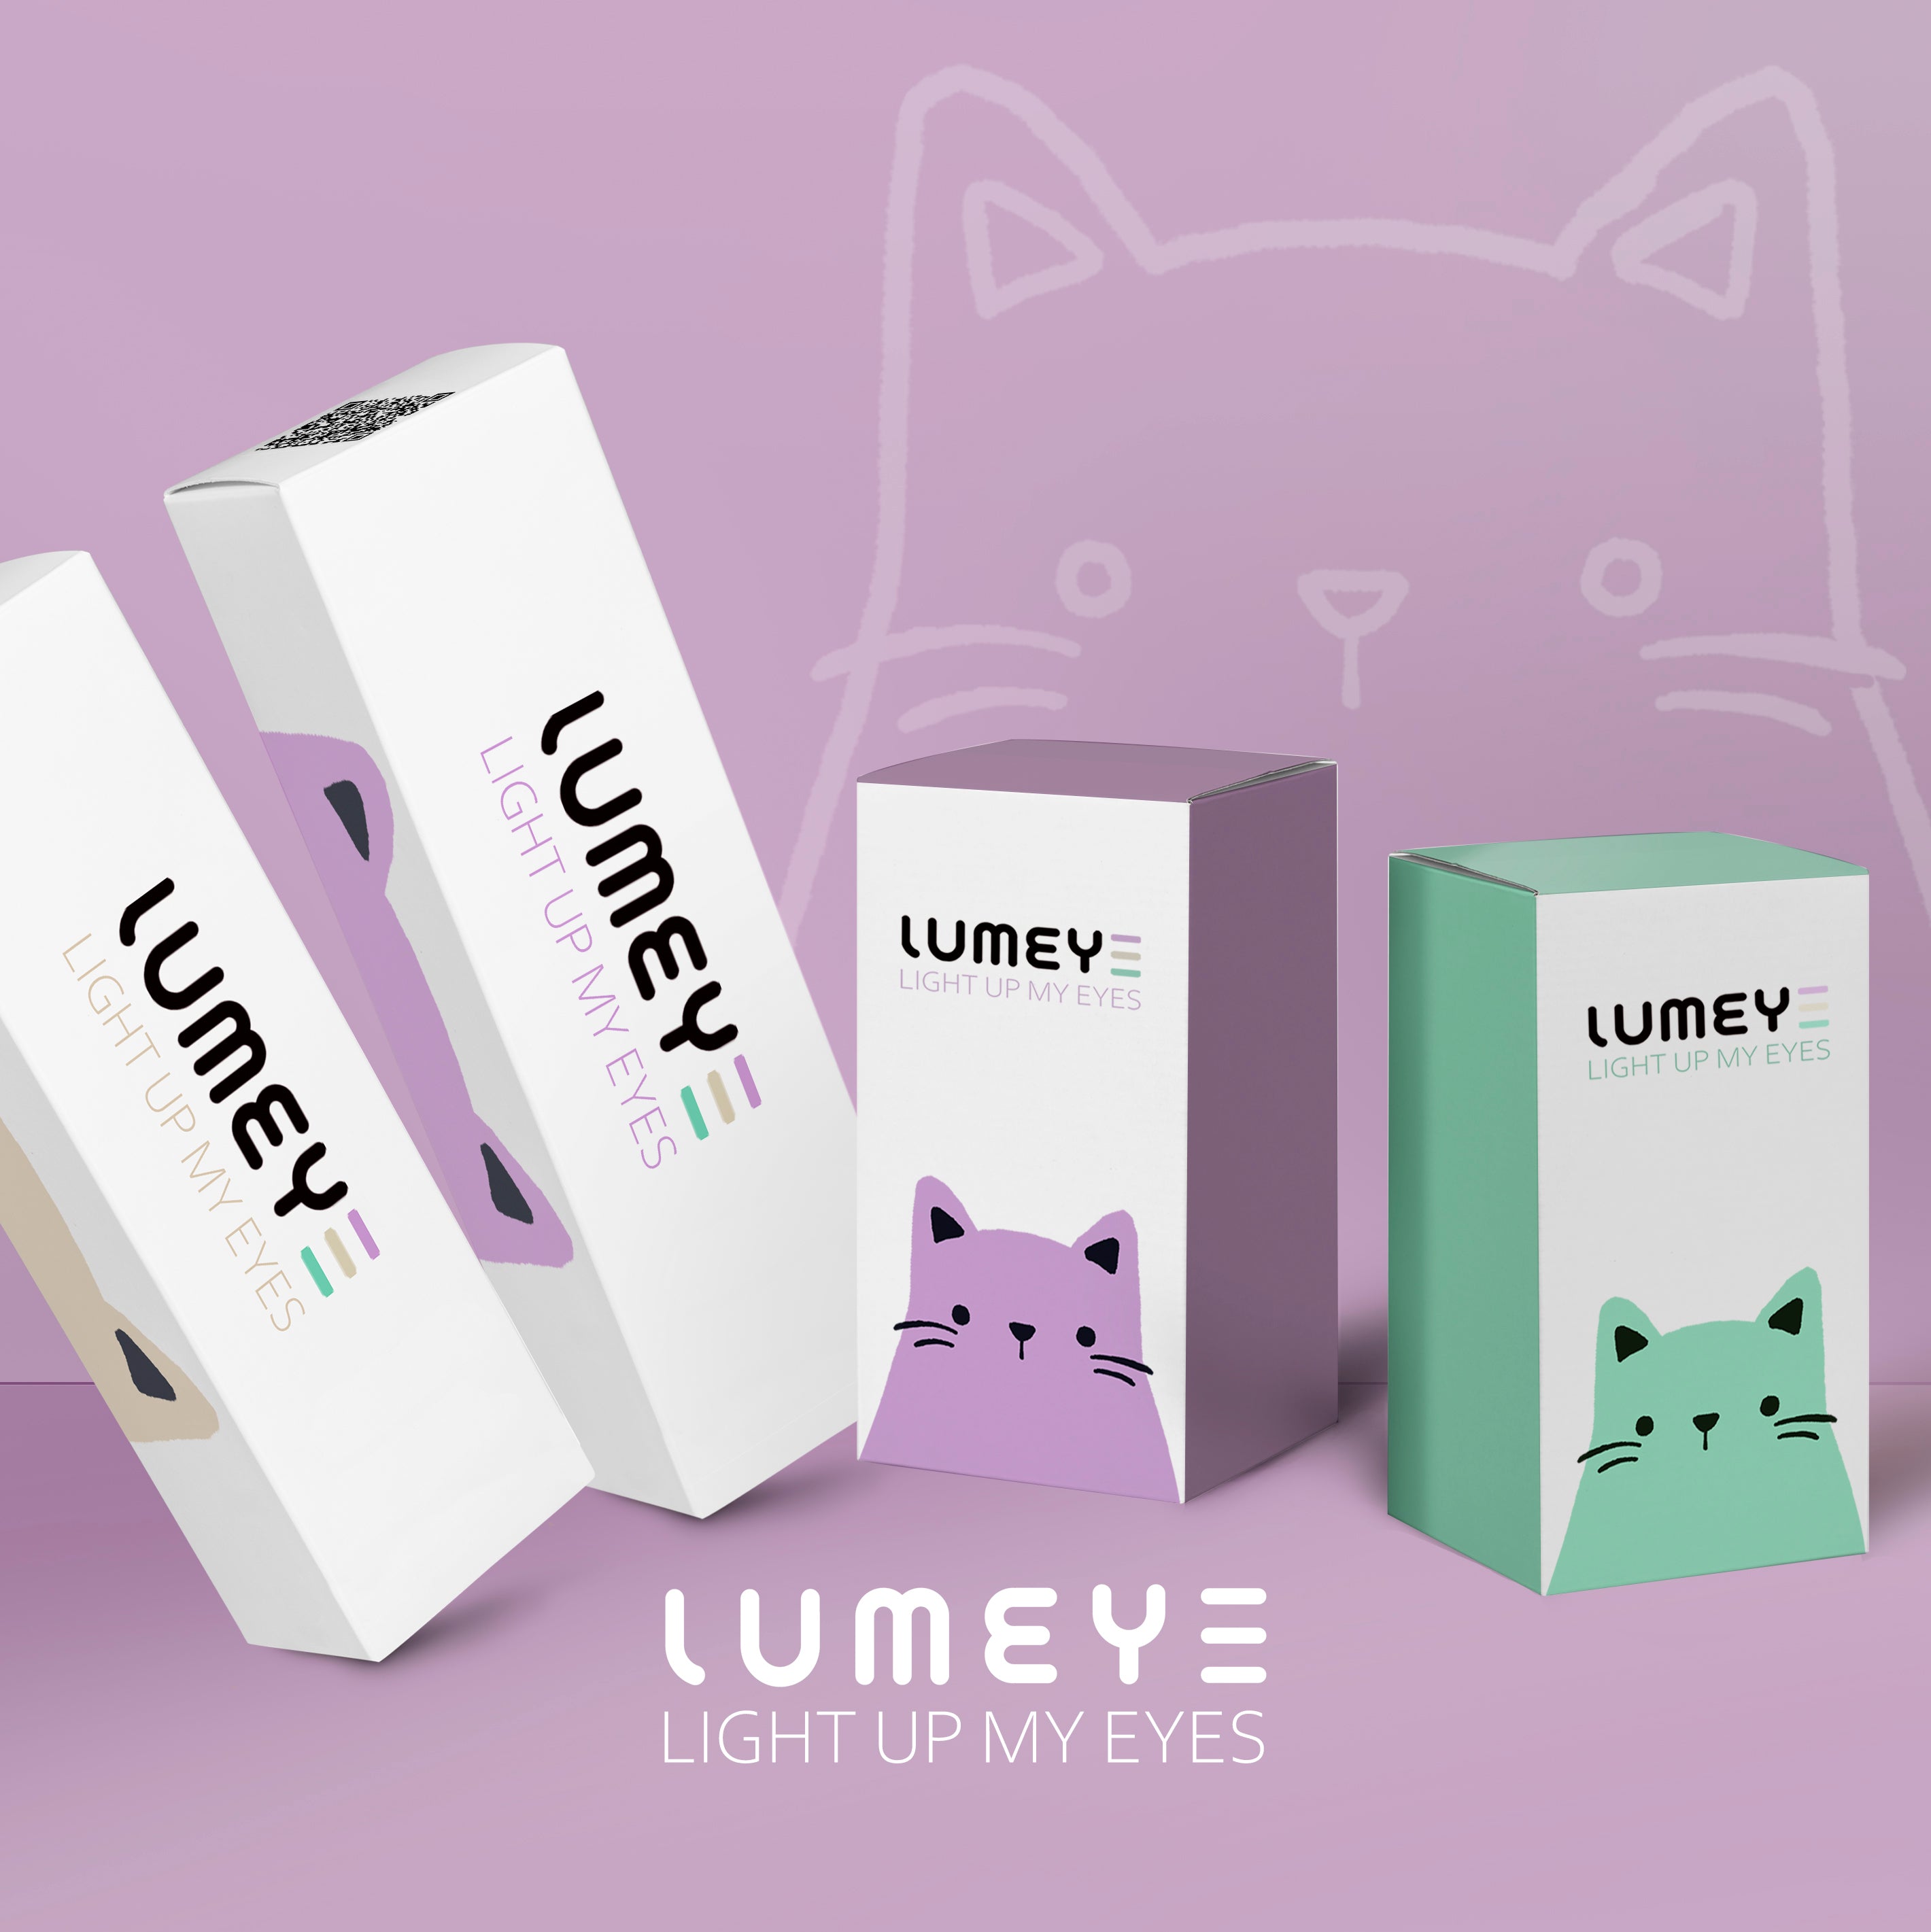 Best COLORED CONTACTS - LUMEYE Lavender Waltz Purple Colored Contact Lenses - LUMEYE